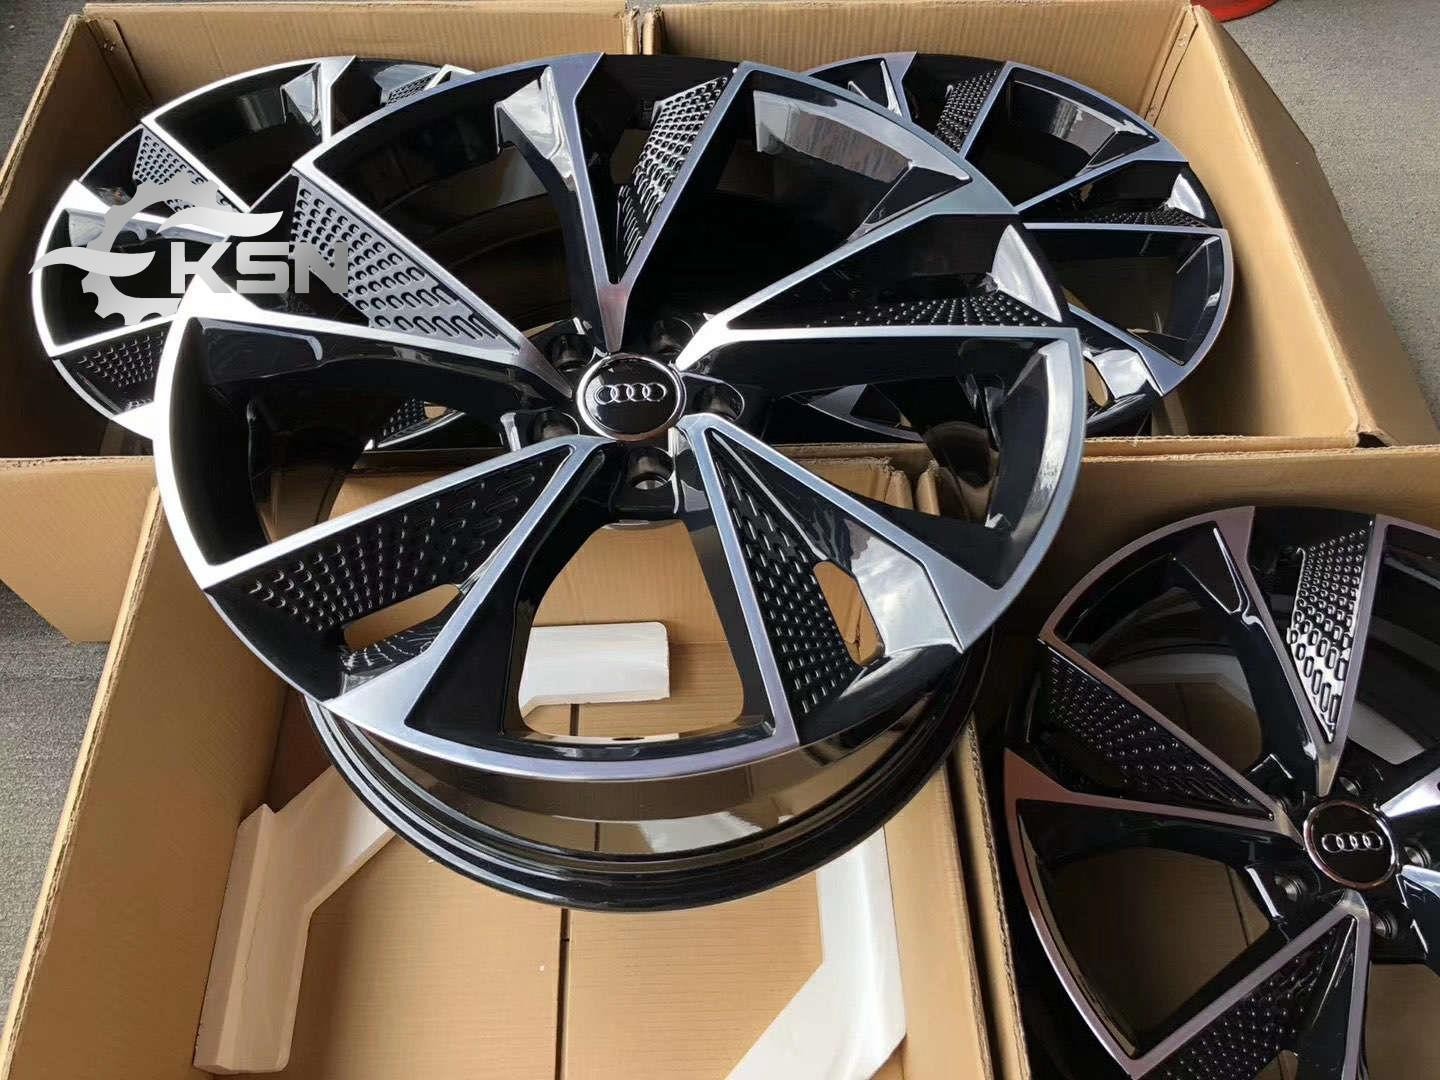 Custom forged aluminum wheels for Audi RS series with machined crocodile skin piano black